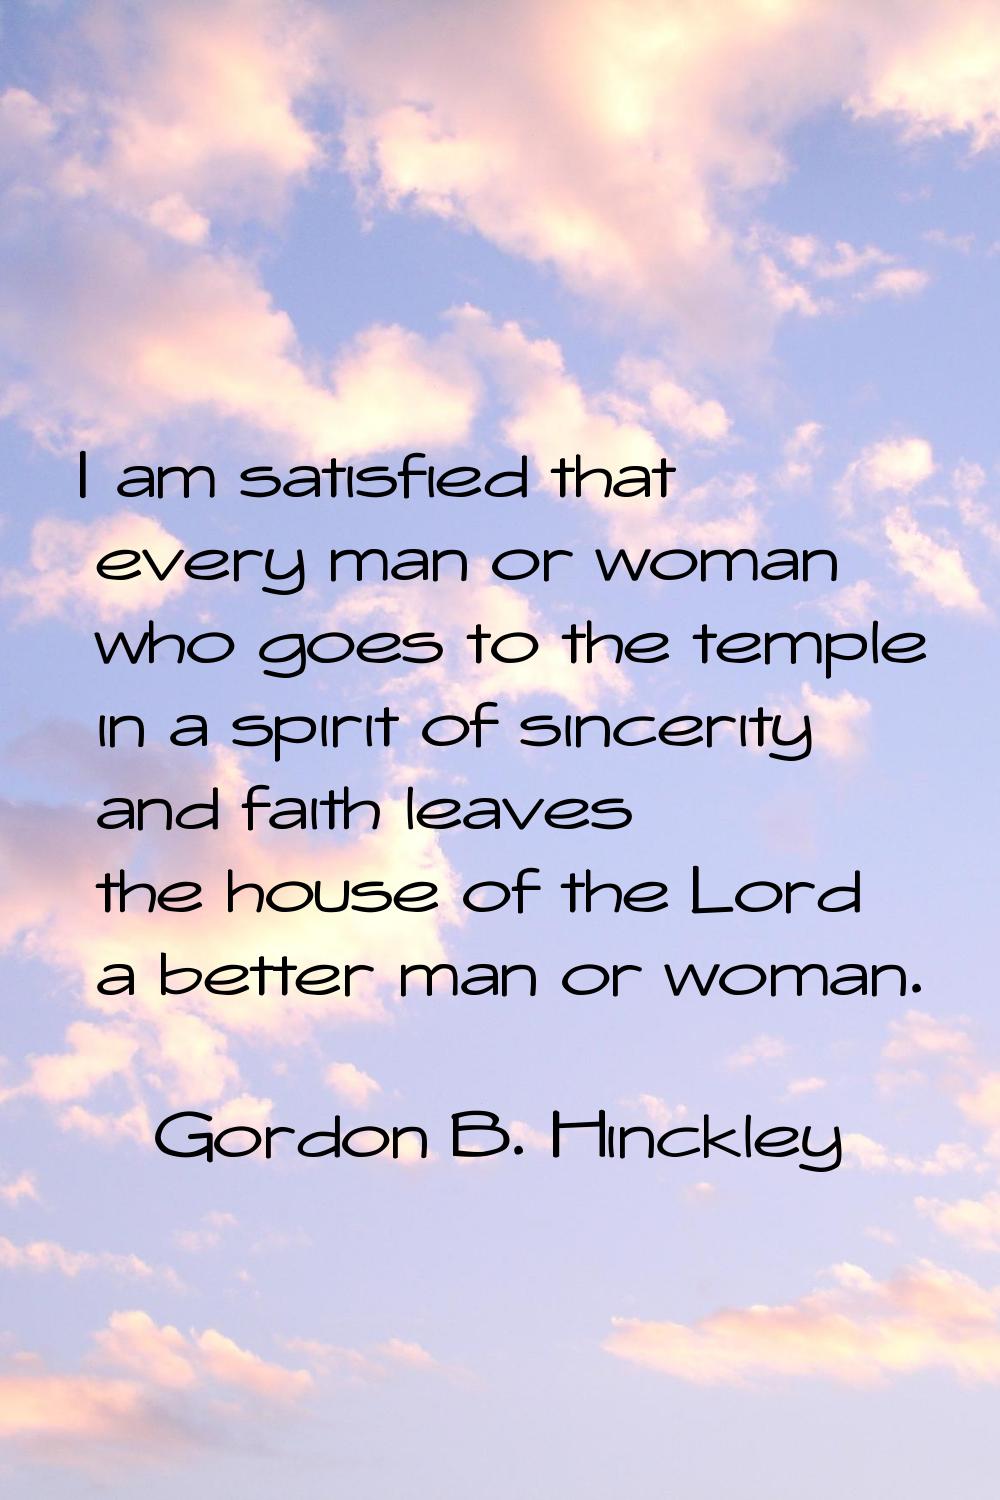 I am satisfied that every man or woman who goes to the temple in a spirit of sincerity and faith le